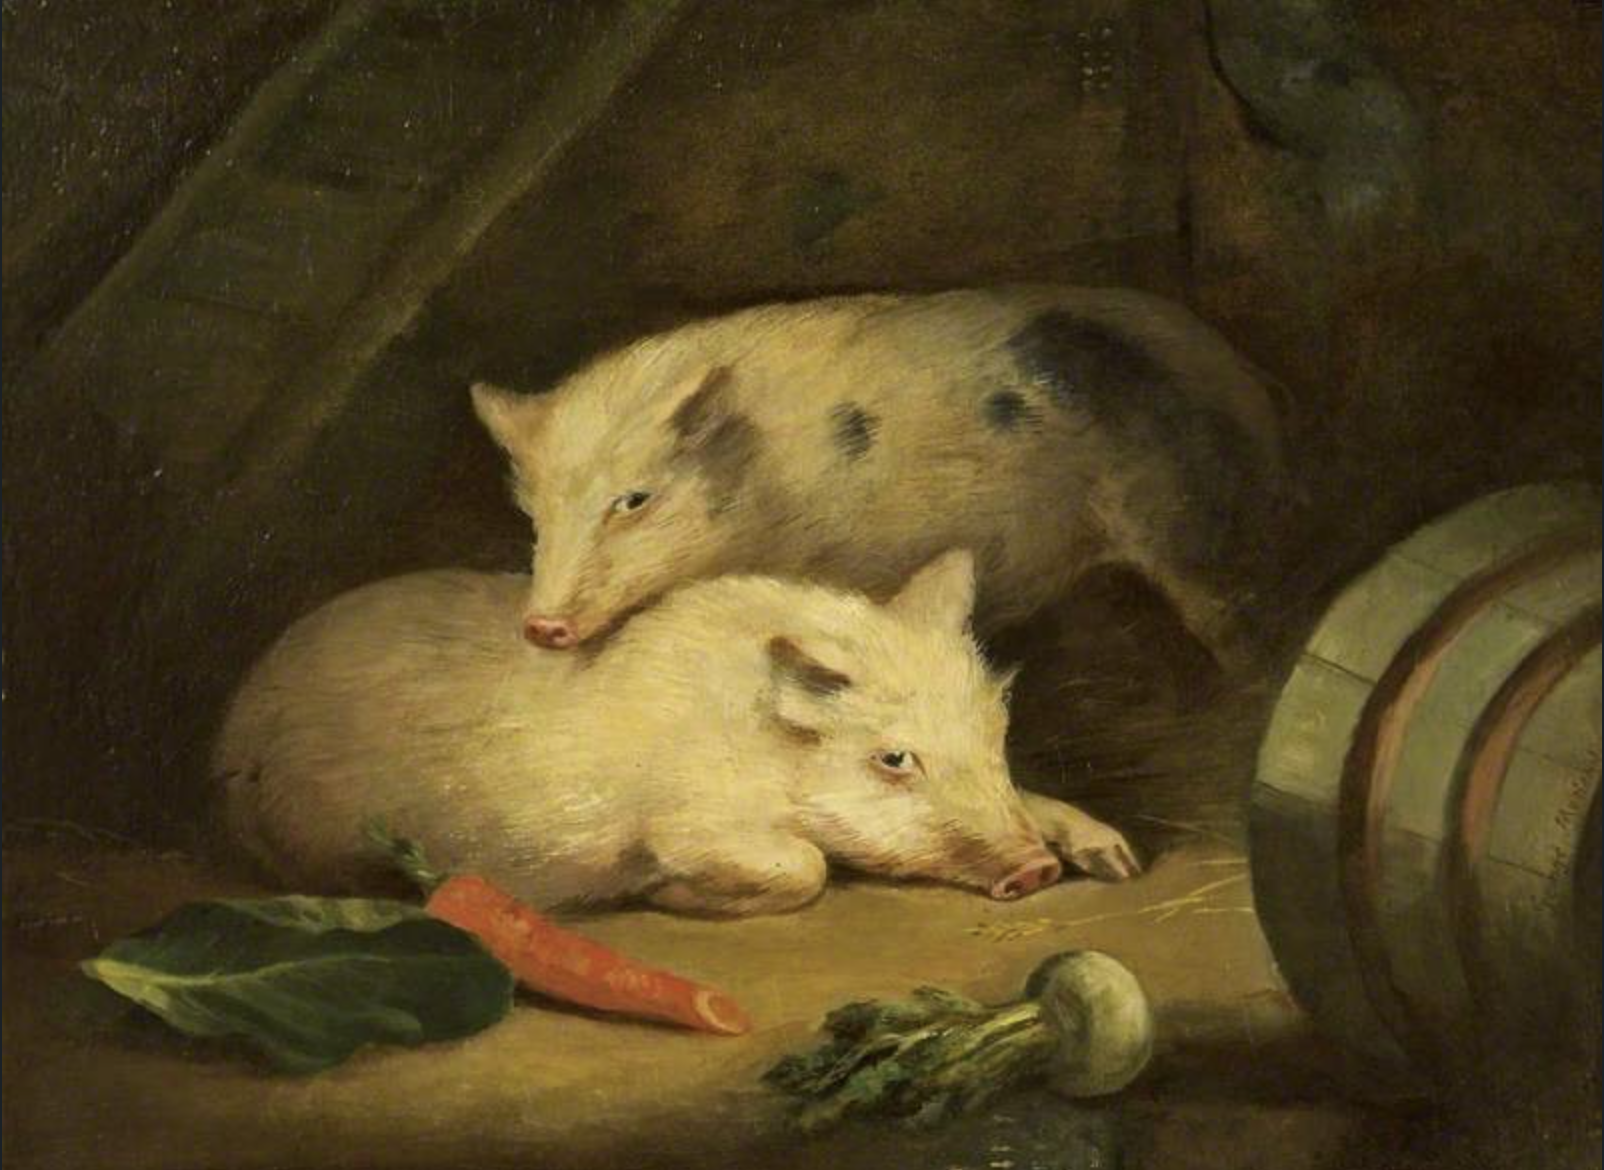 Two pigs by George Morland, late 18th century. Public domain.